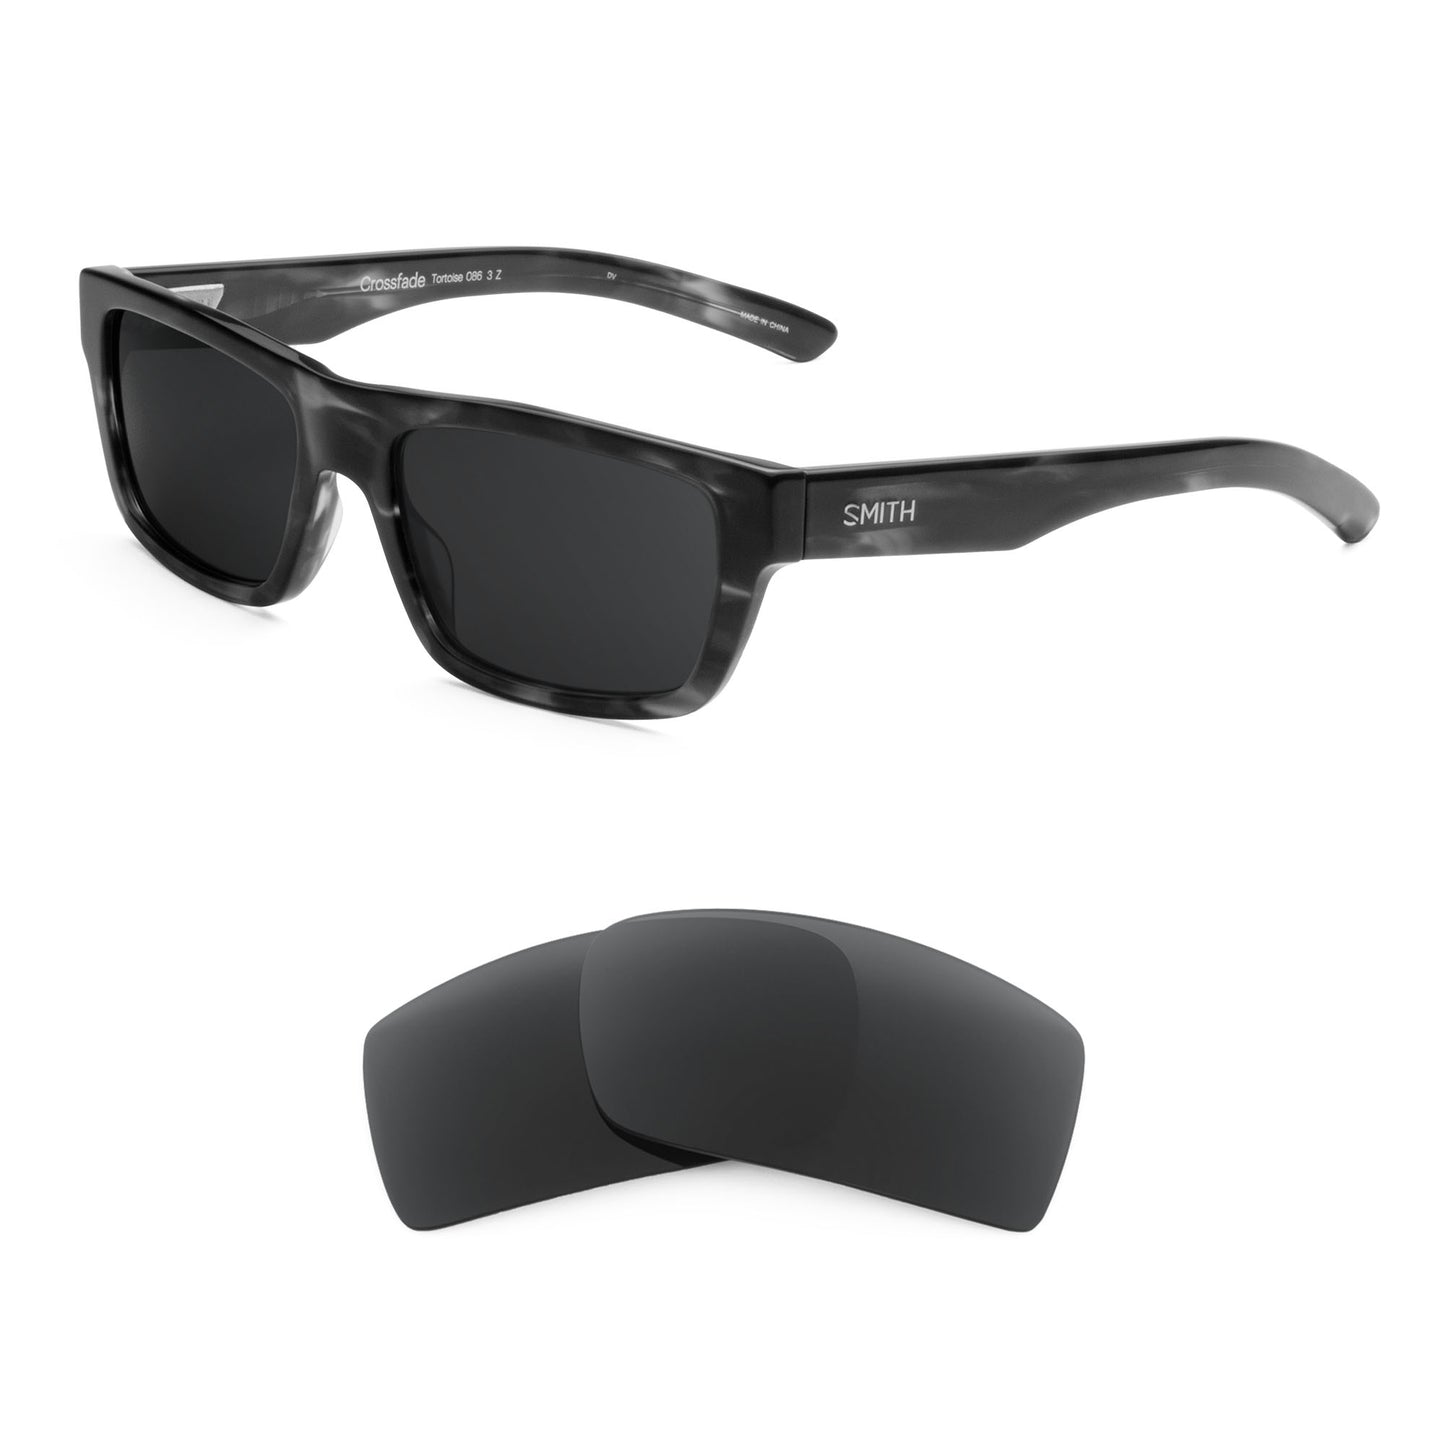 Smith Crossfade sunglasses with replacement lenses